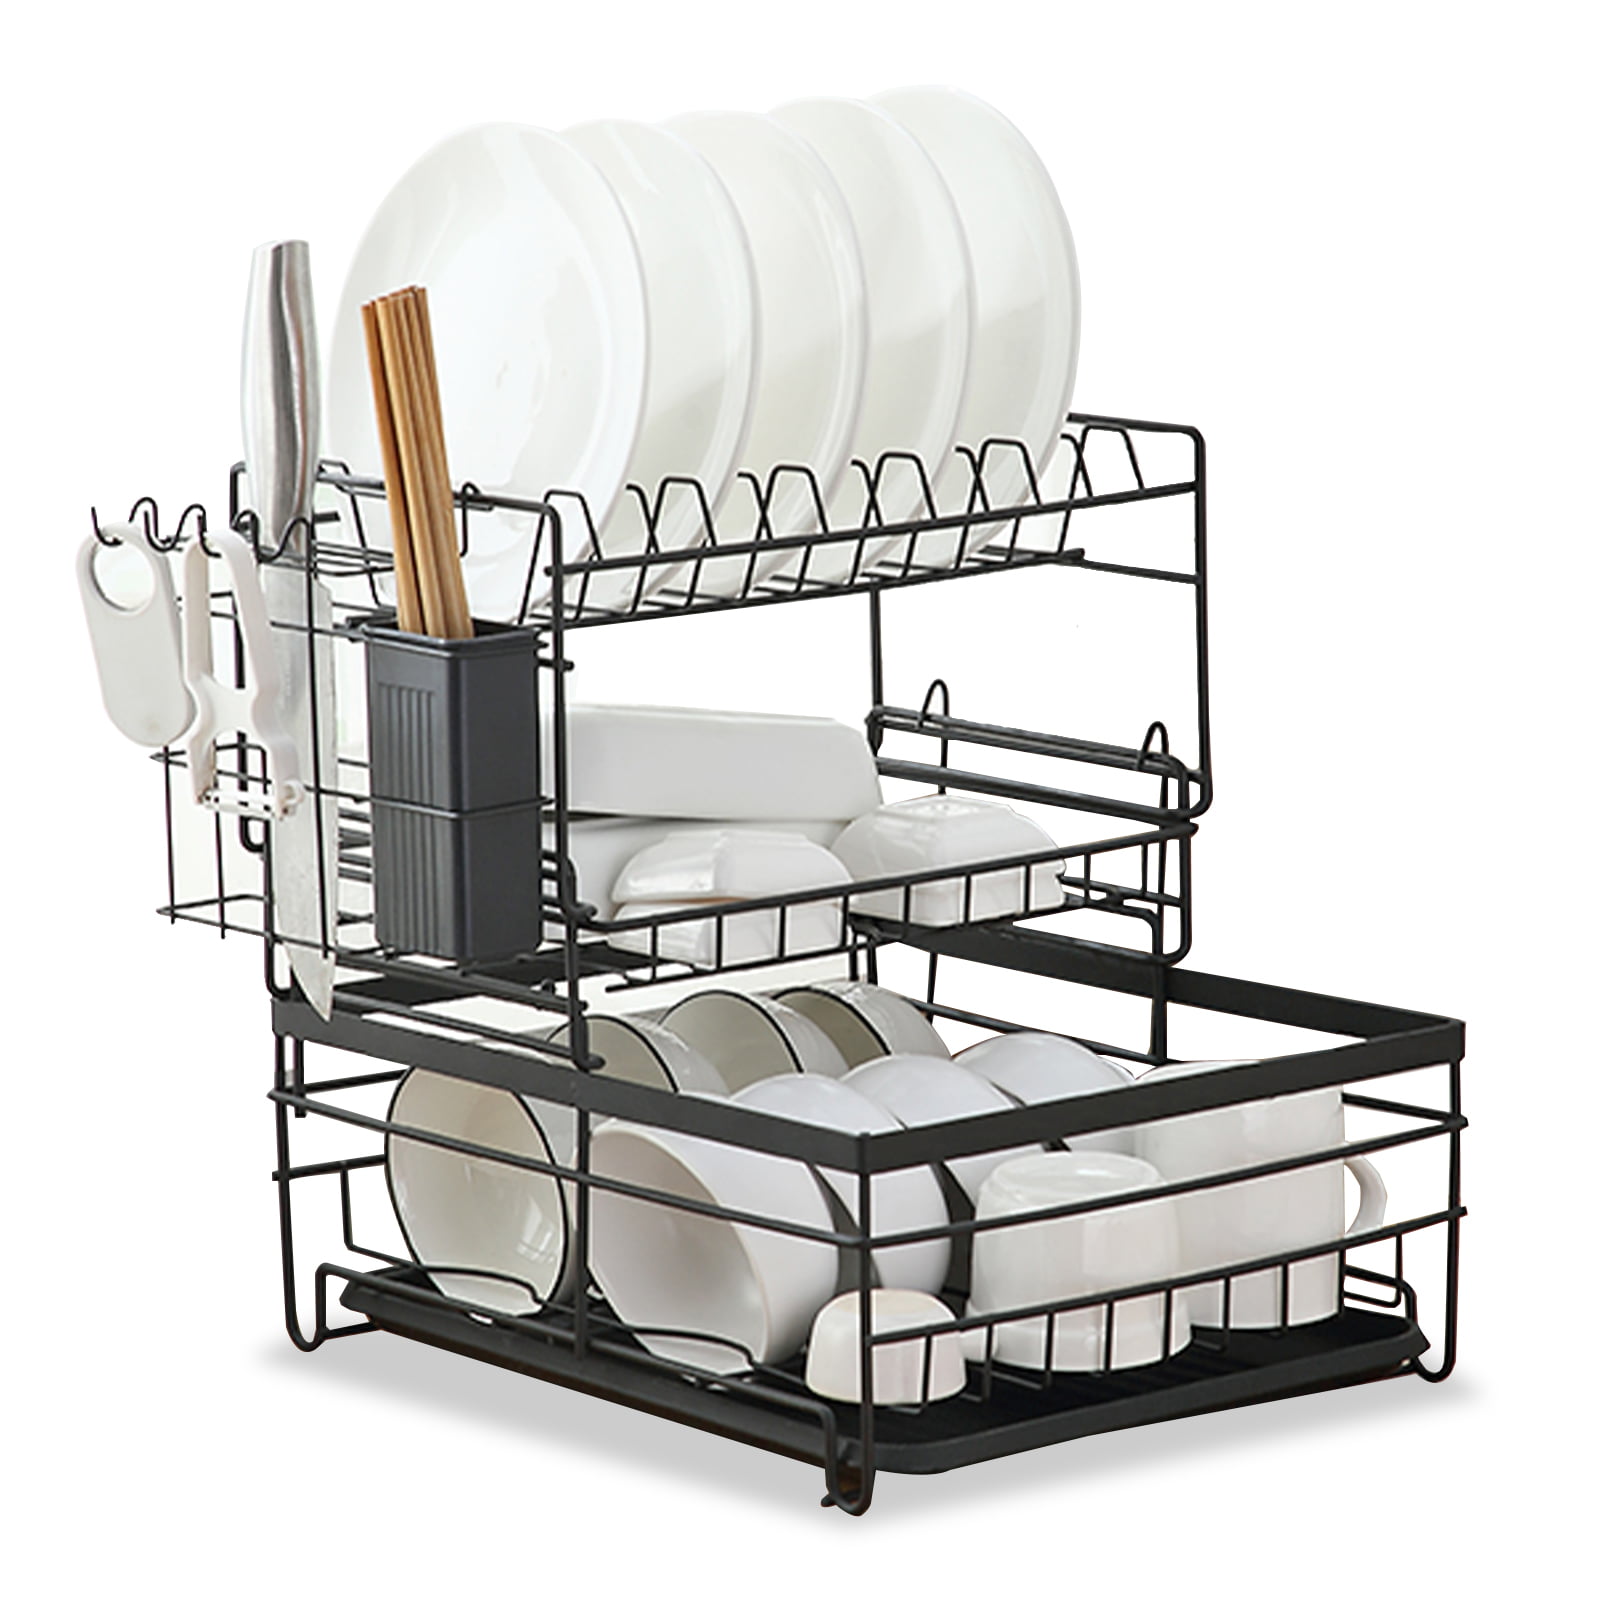 Honelife Dish Drying Rack 3 Tier Dish Rack Steel with Removable Drain Board Storage Rack for Dish Drainer Utensil Holder Cutting Board Holder for Kitchen Countertop Organizer Storage